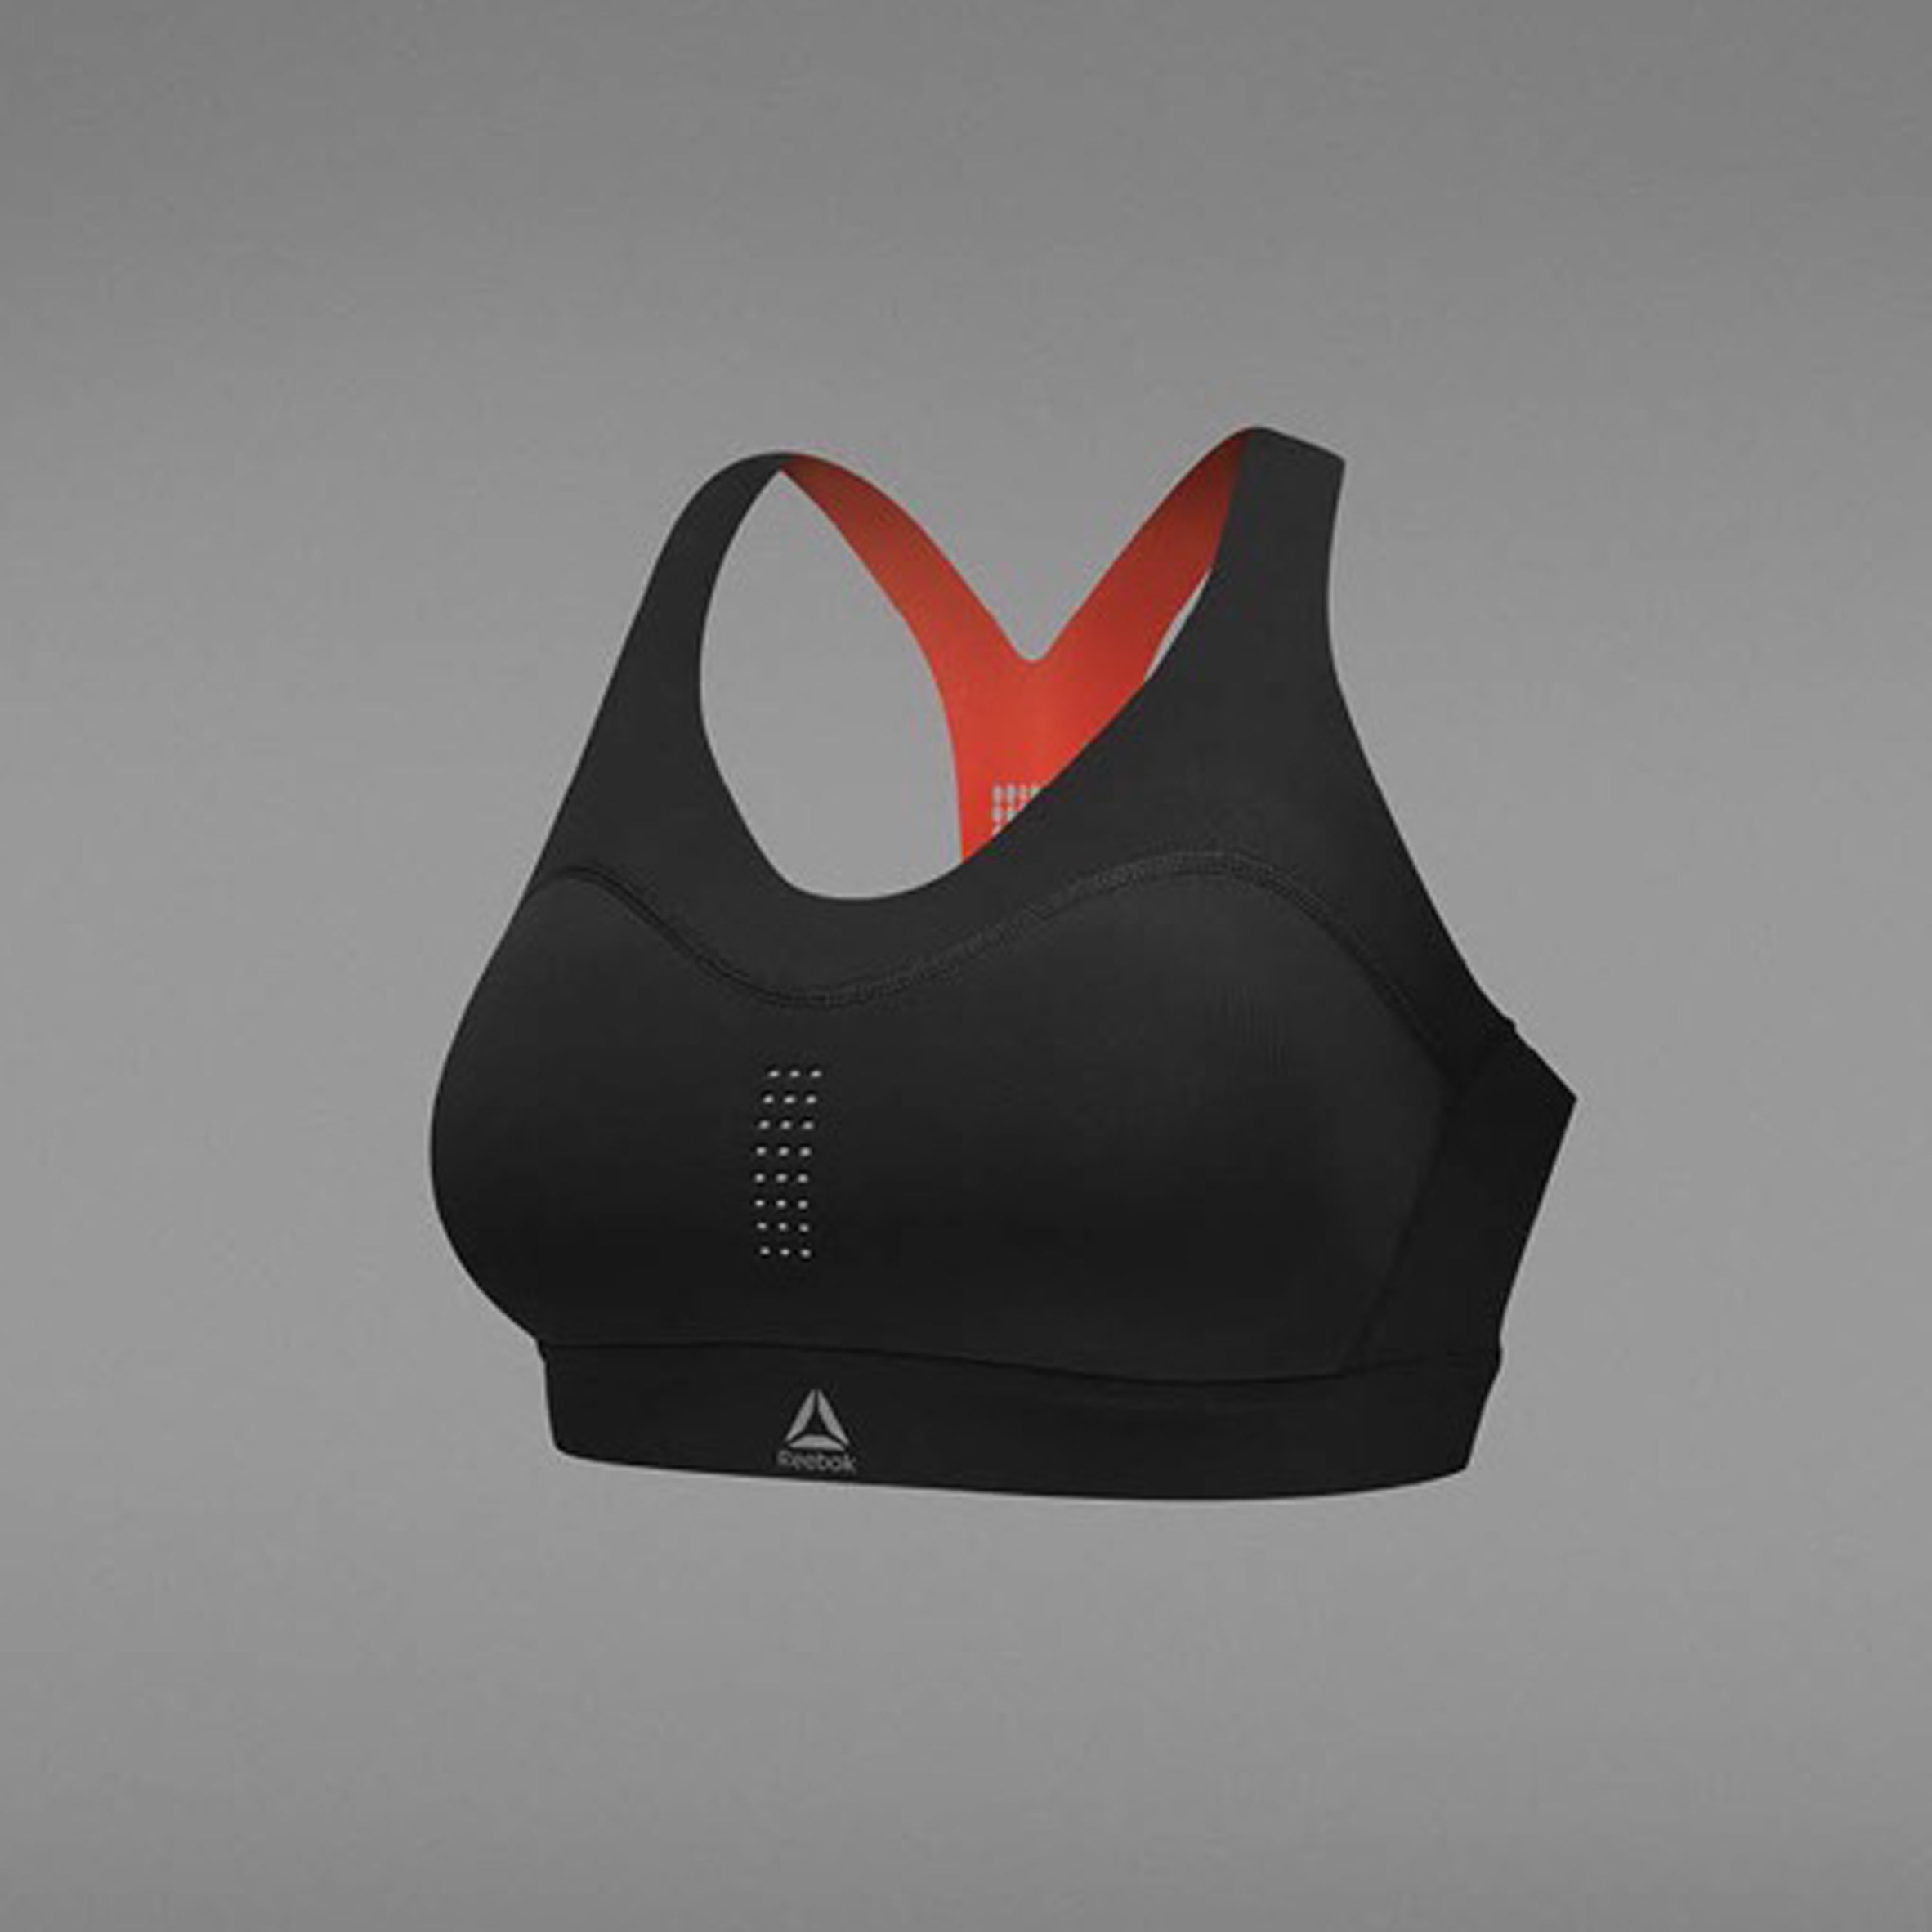 Reebok Women's PureMove Sports Bra with Adjustable Support Best, OutdoorFull.com in 2023